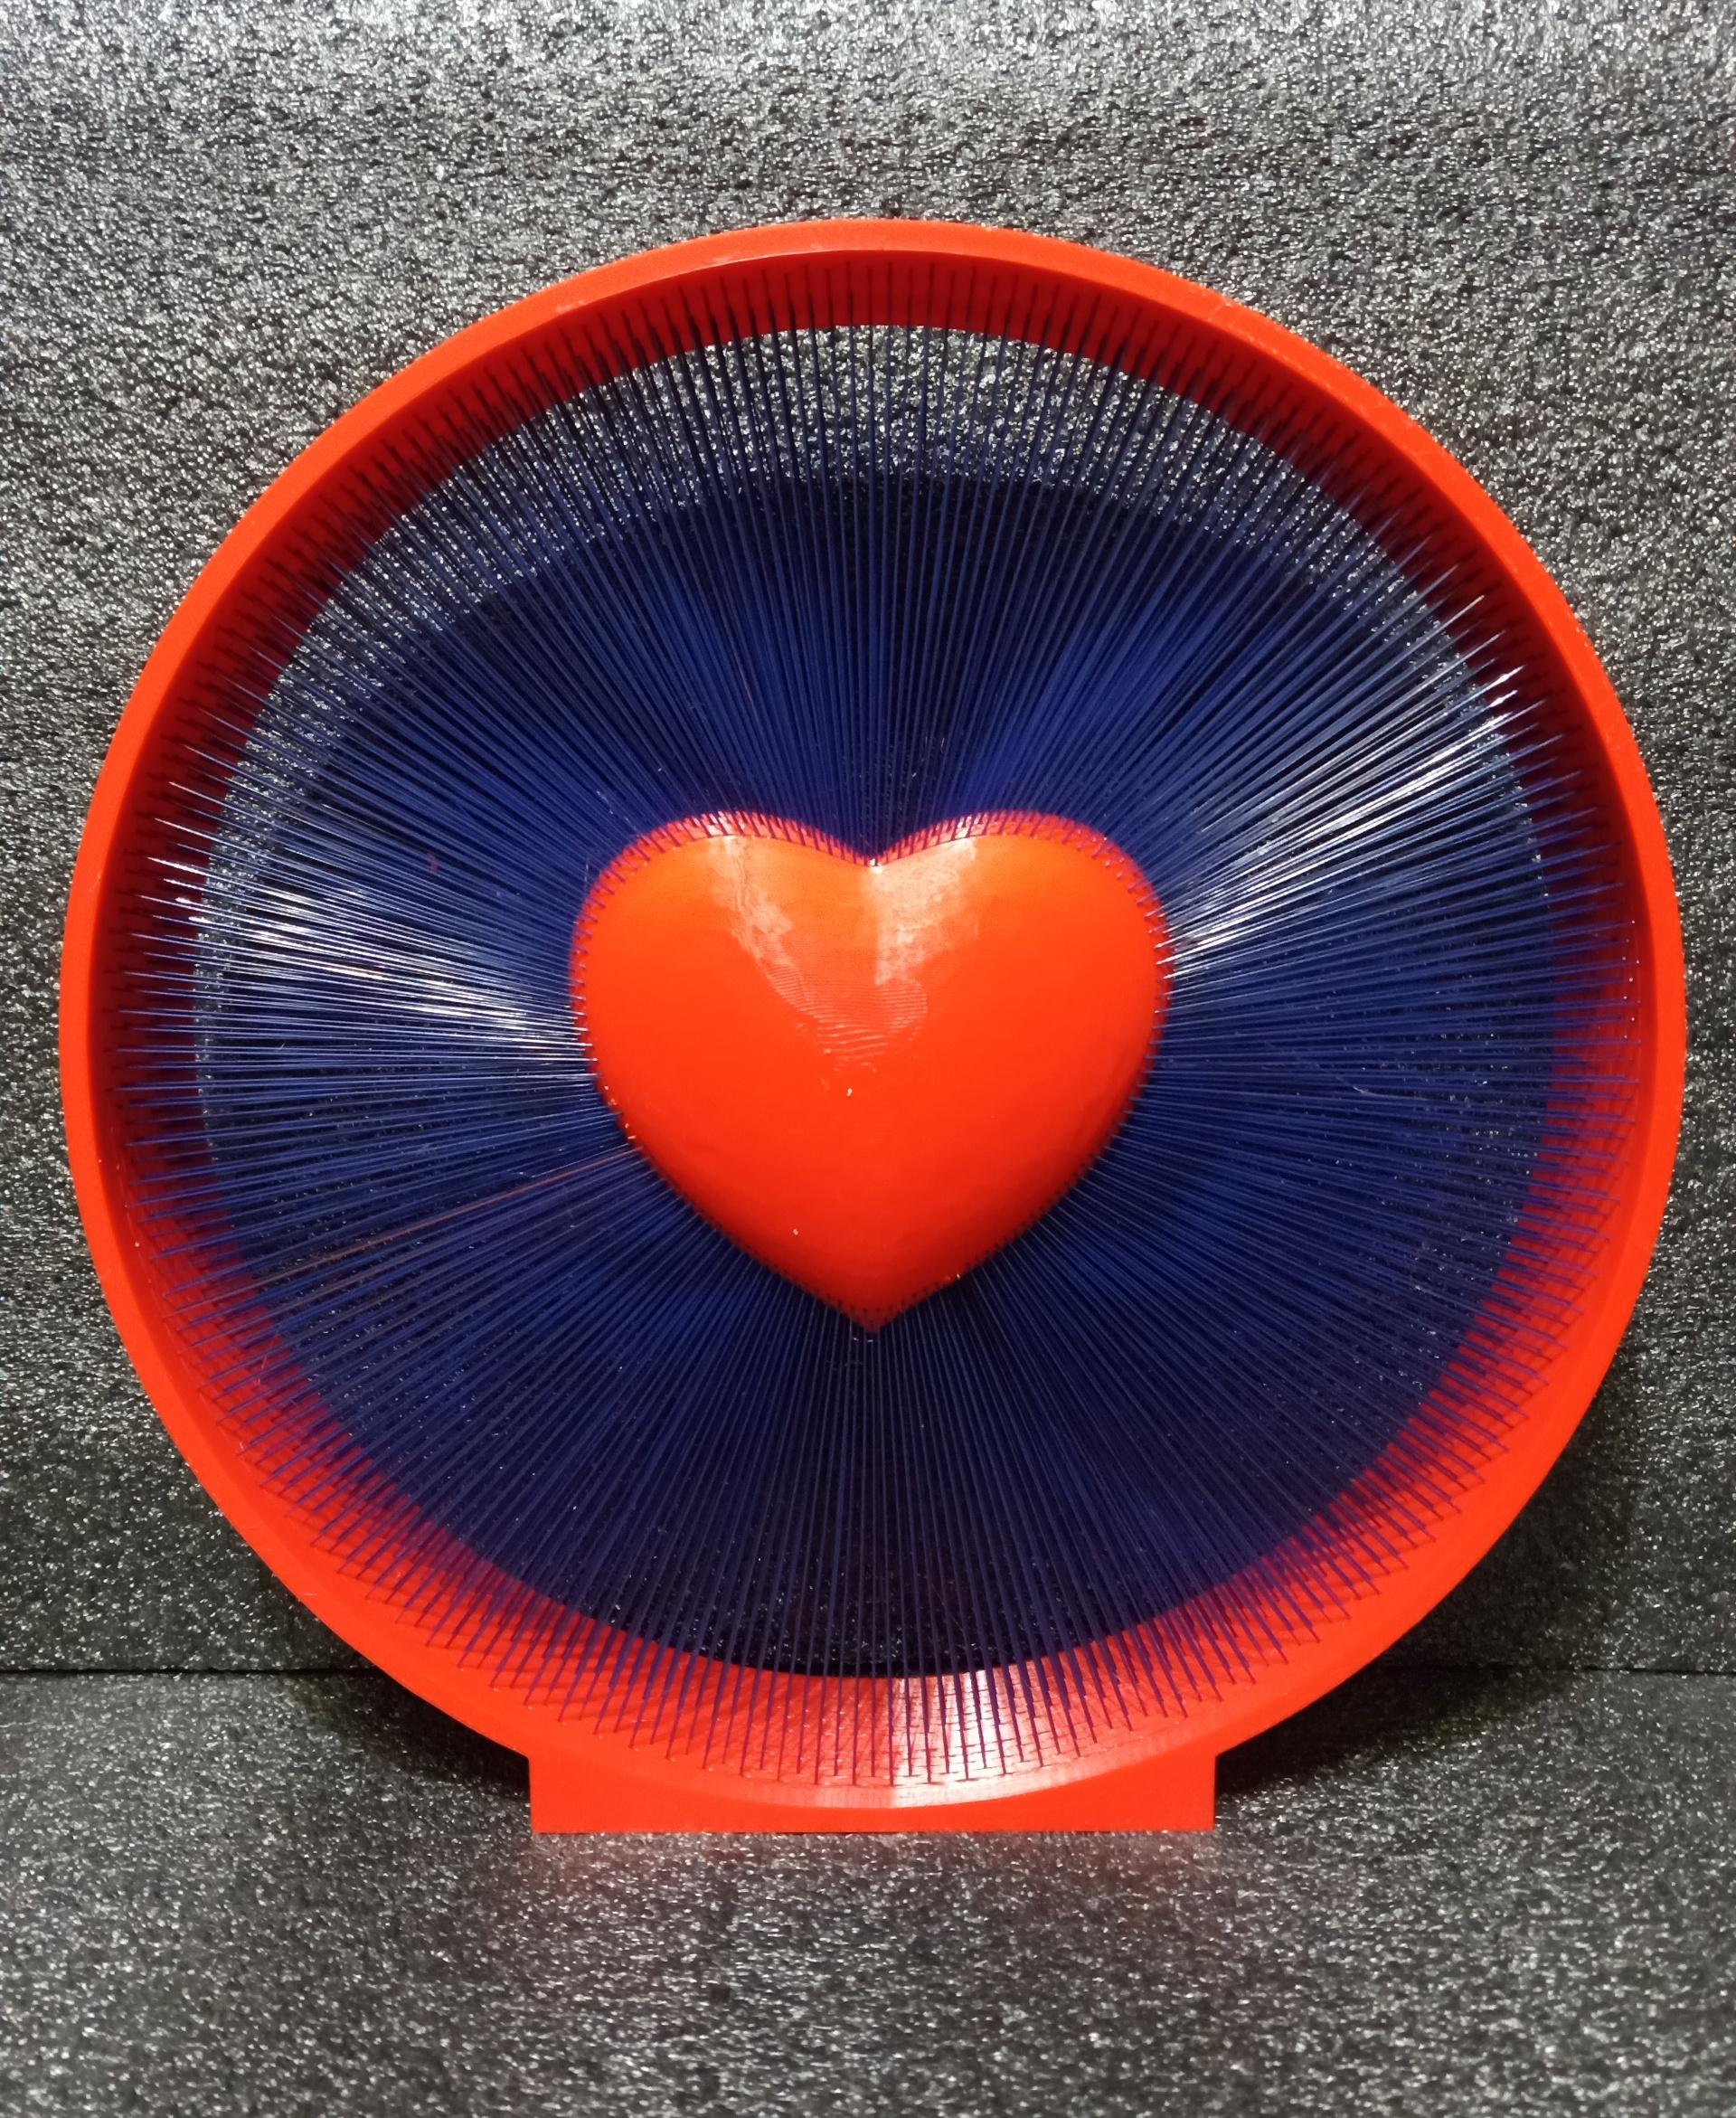 Heart Strings Artwork - 0.08 layers for the top of the heart , matterhackers navy blue / red - 3d model